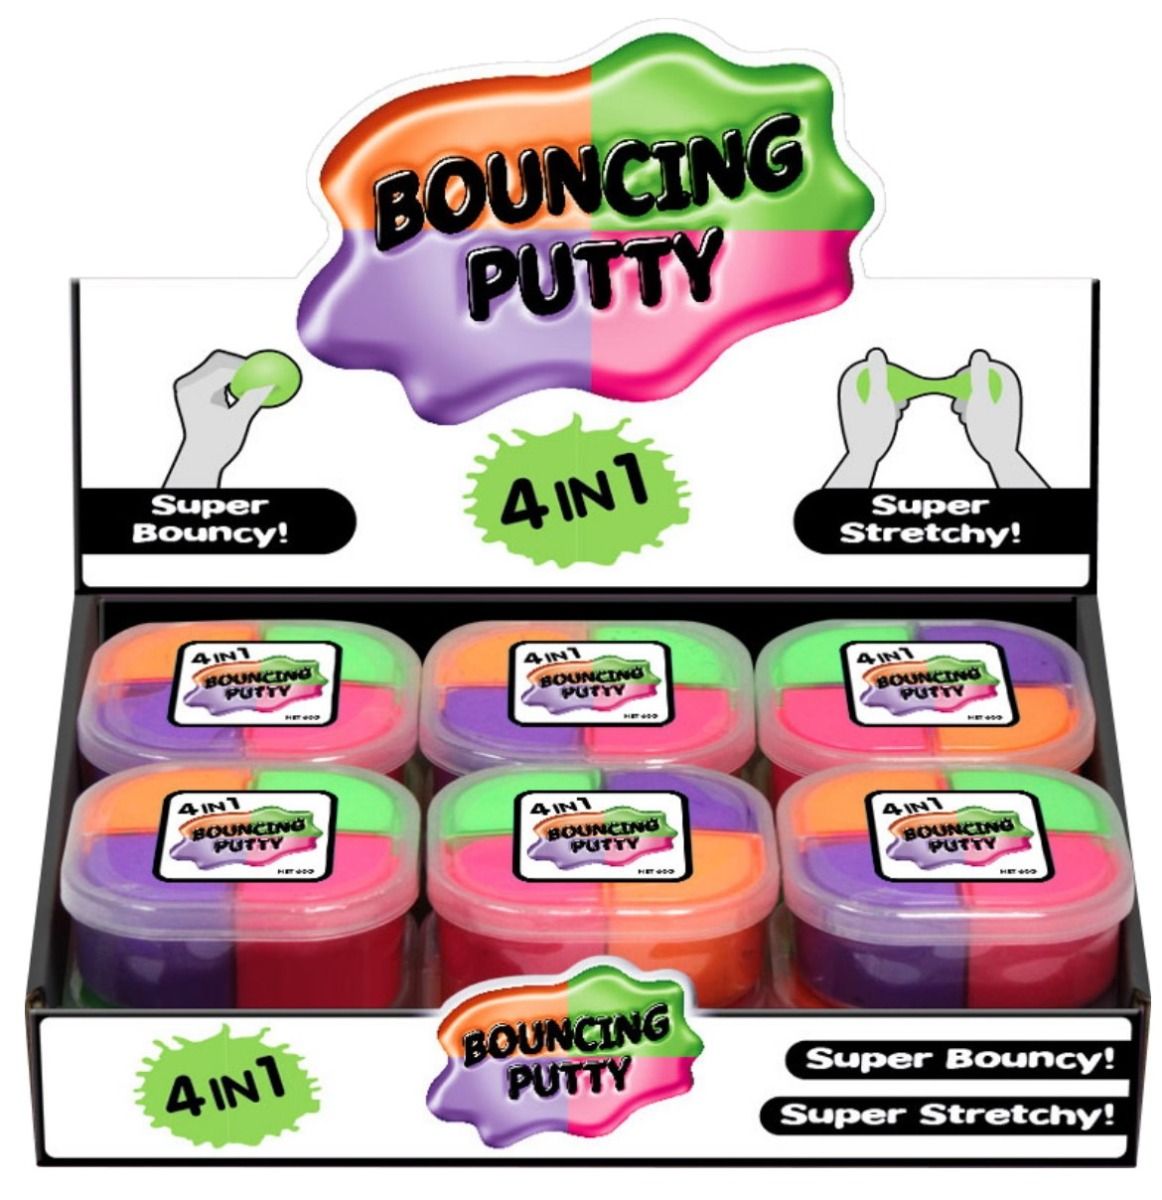 4 in 1 Bouncing Putty / slime